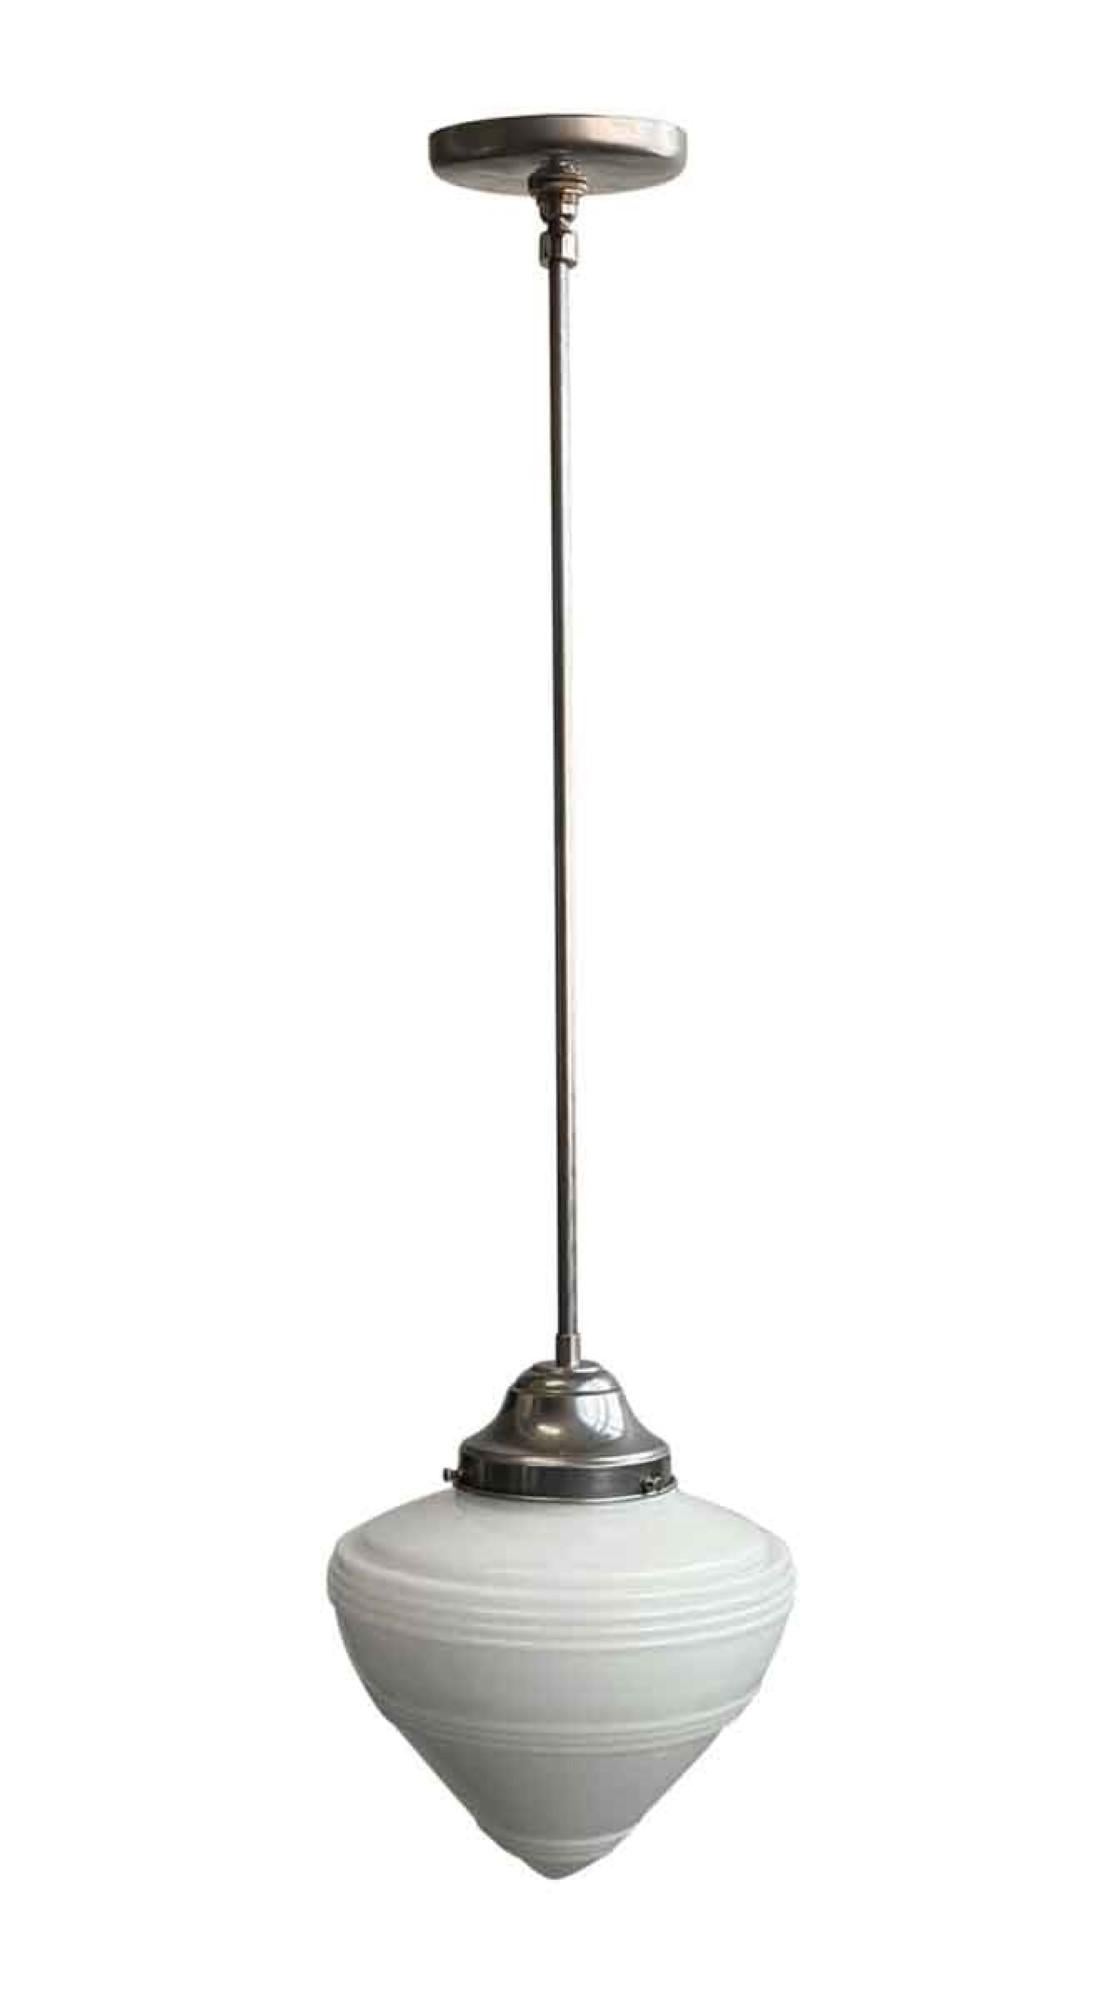 Industrial Huge White Milk Glass Shade School House Style Ceiling Light Lamp 